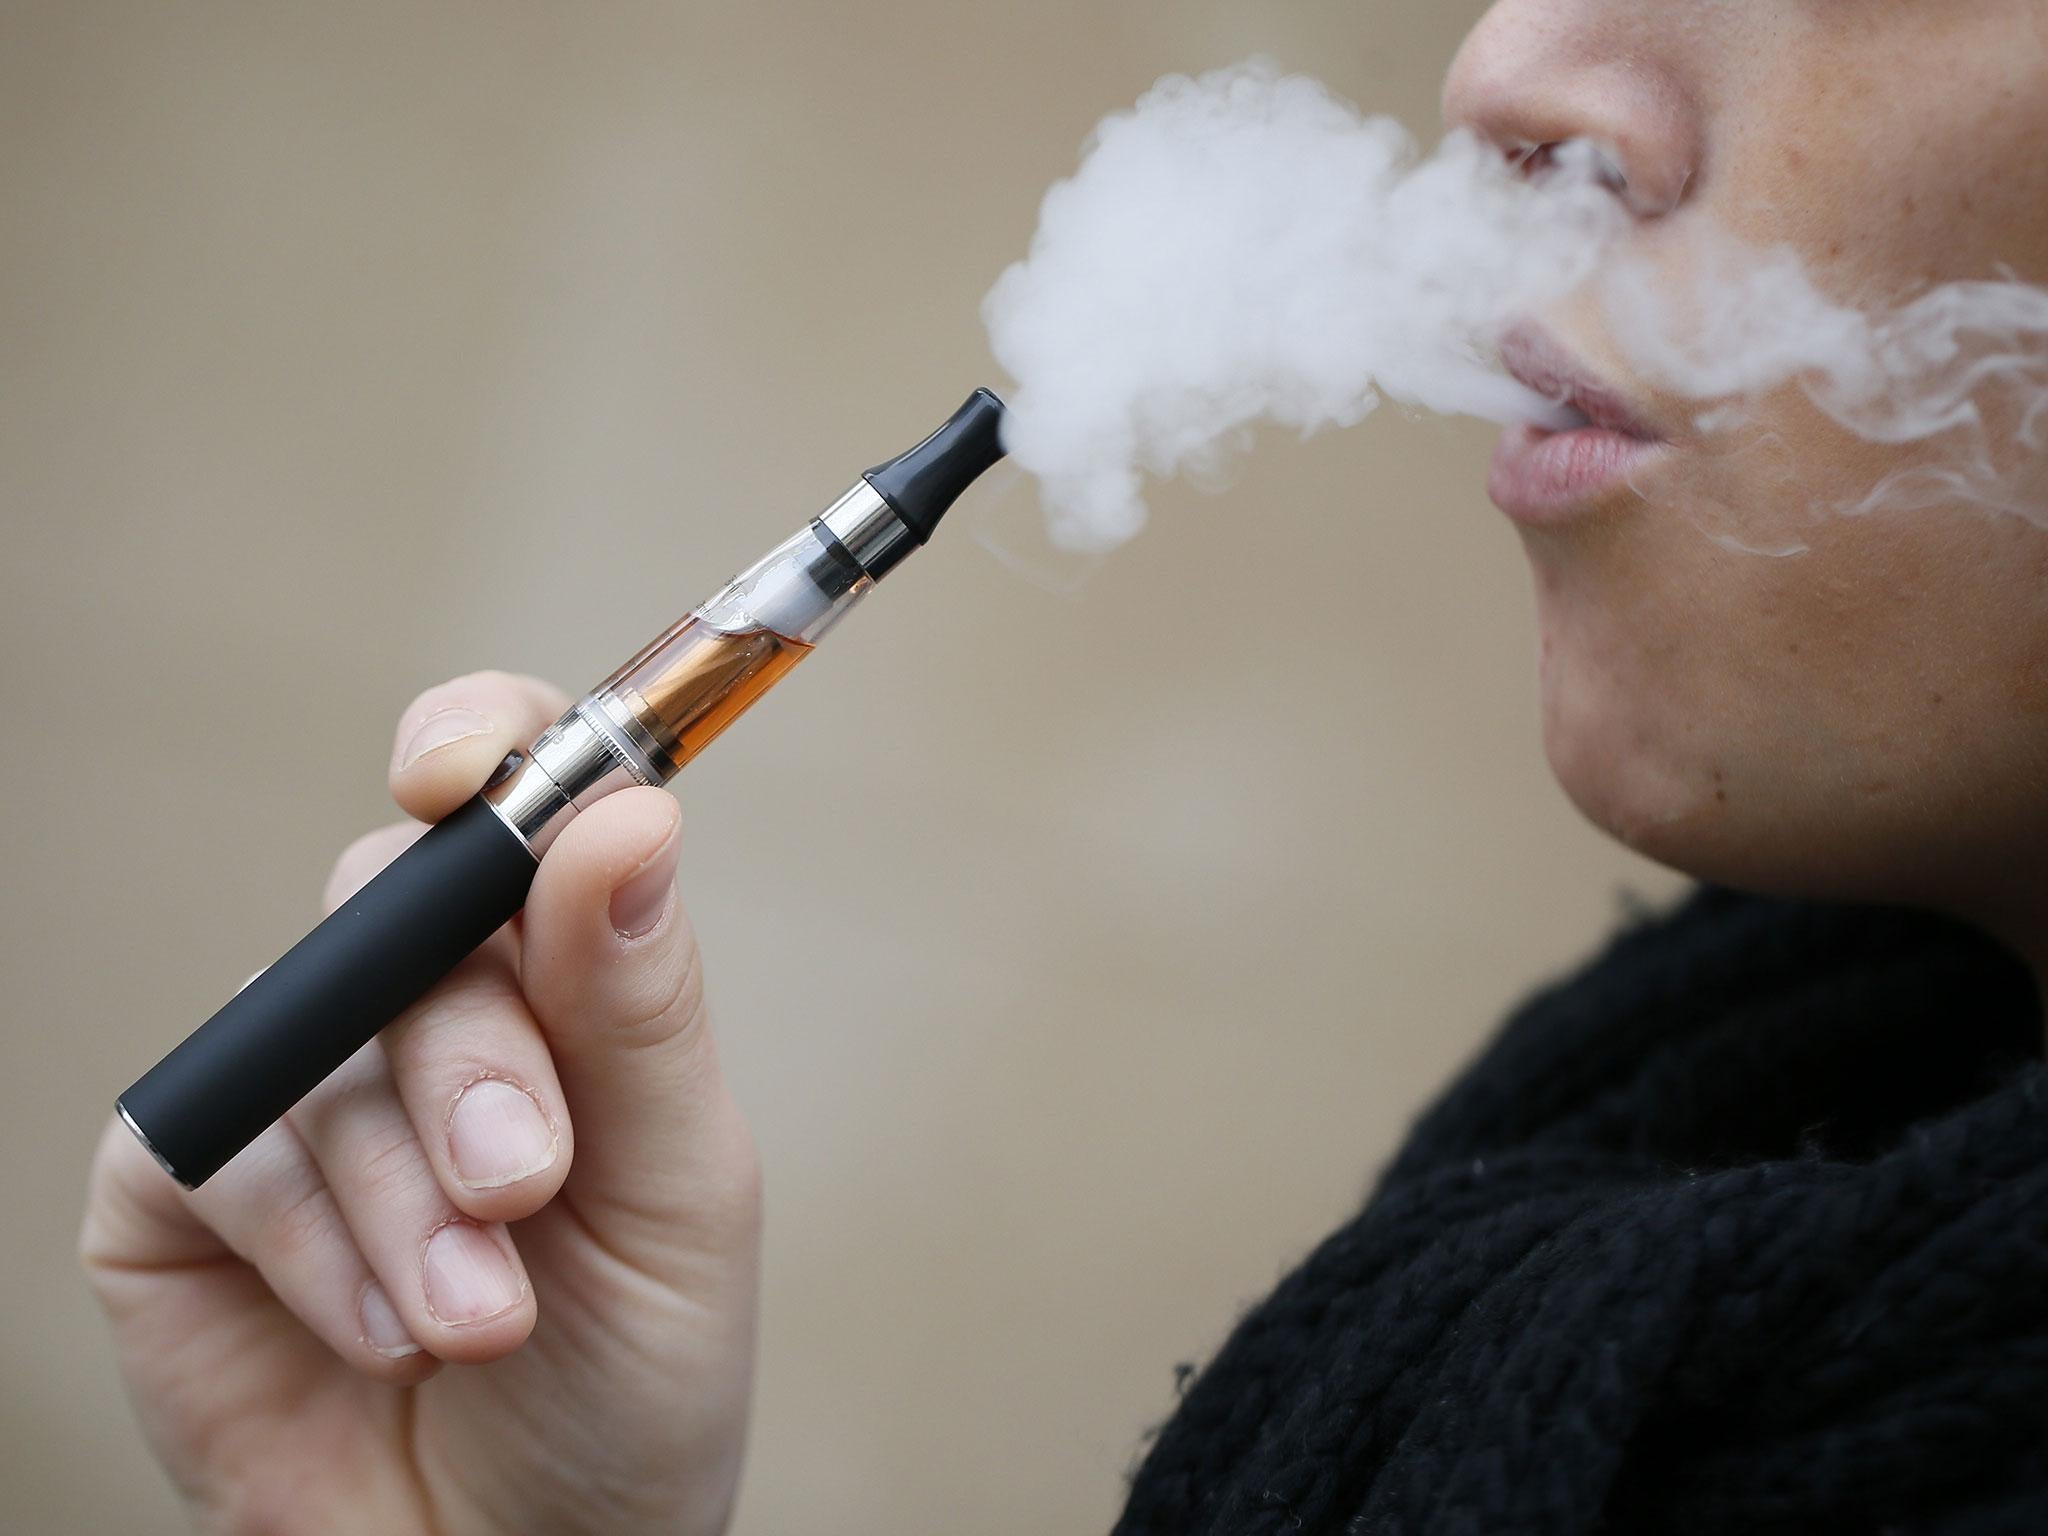 E-cigarettes can cause cell death, according to a new study